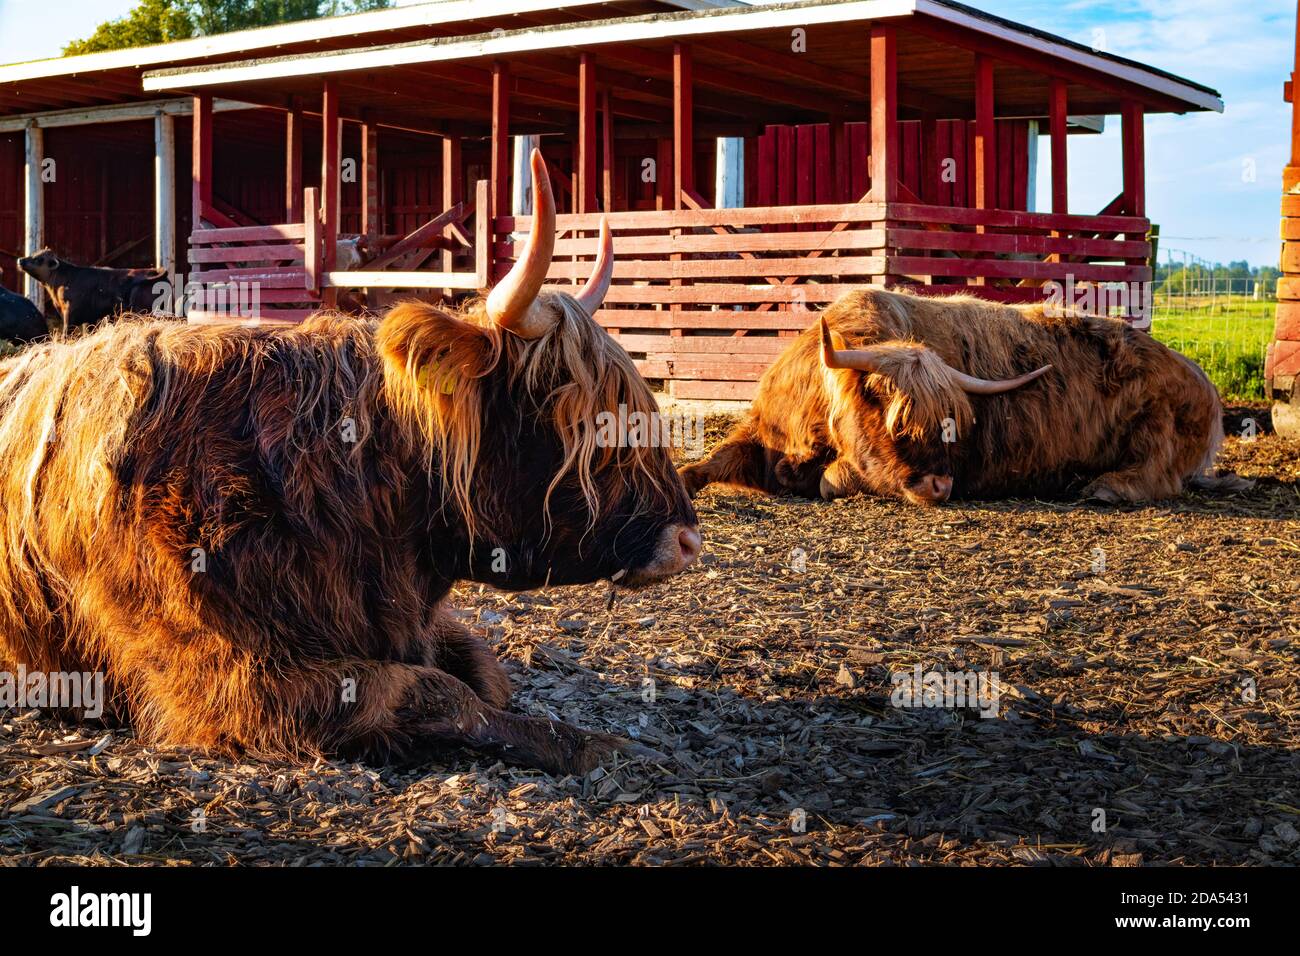 Highland Cattle Farm. Brown bulls in the morning sun light. Agriculture, farming. Red building. Cattle breed. Organic food concept. Red barns. Stock Photo